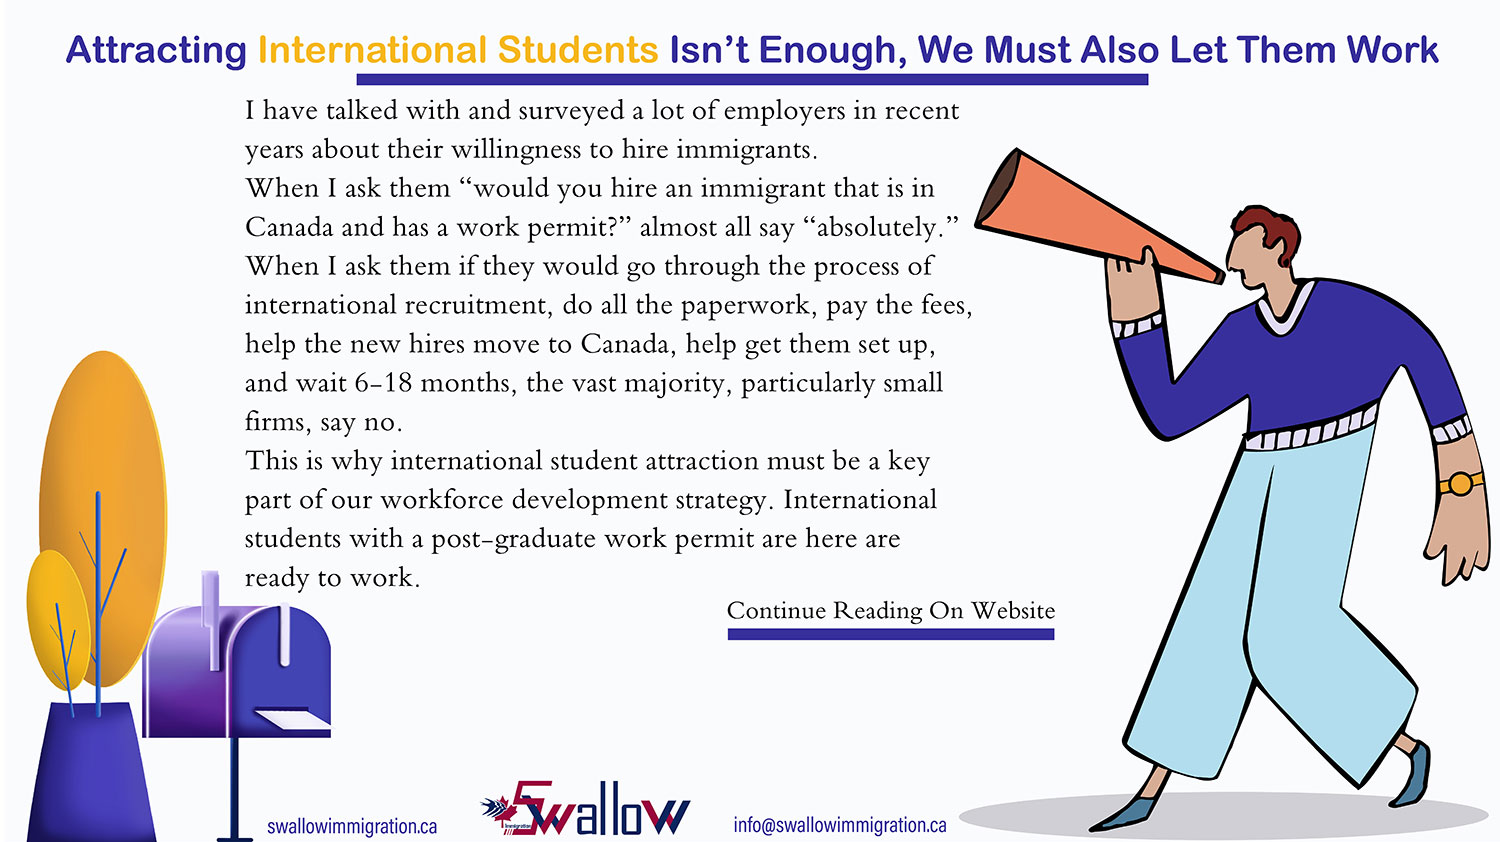 Attracting International Students Isn’t Enough, We Must Also Let Them Work